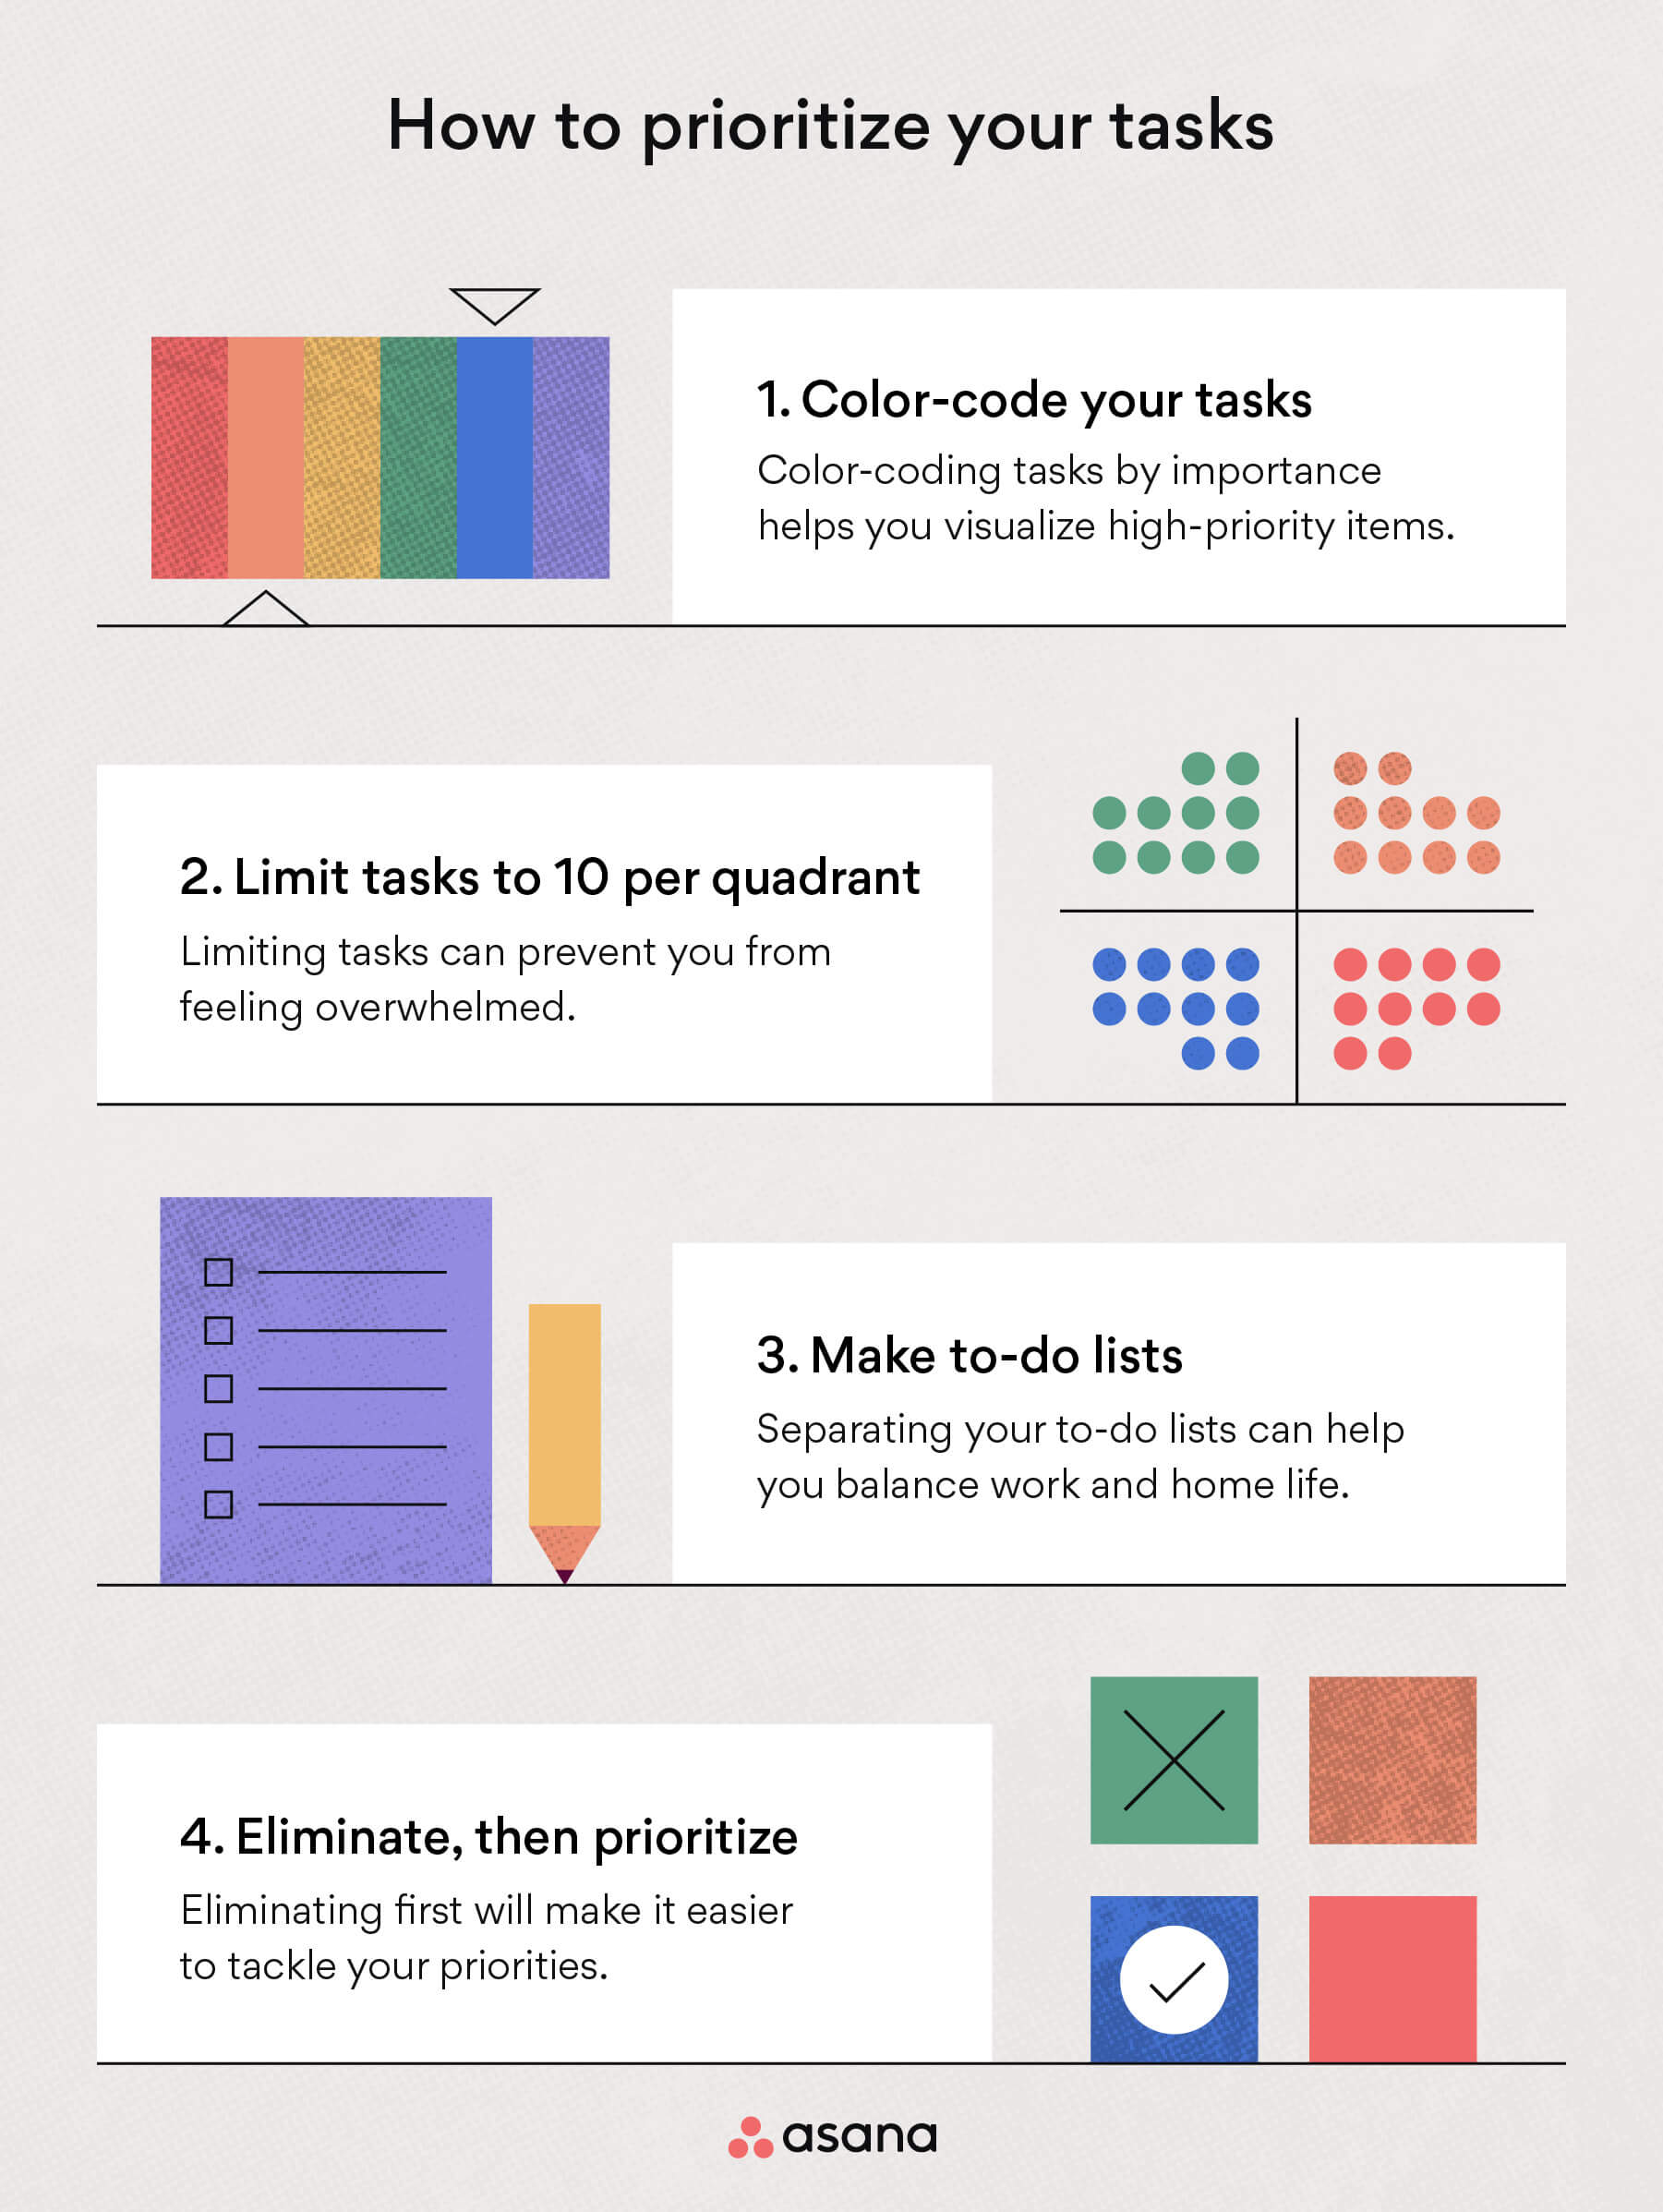 Tips for prioritizing your tasks